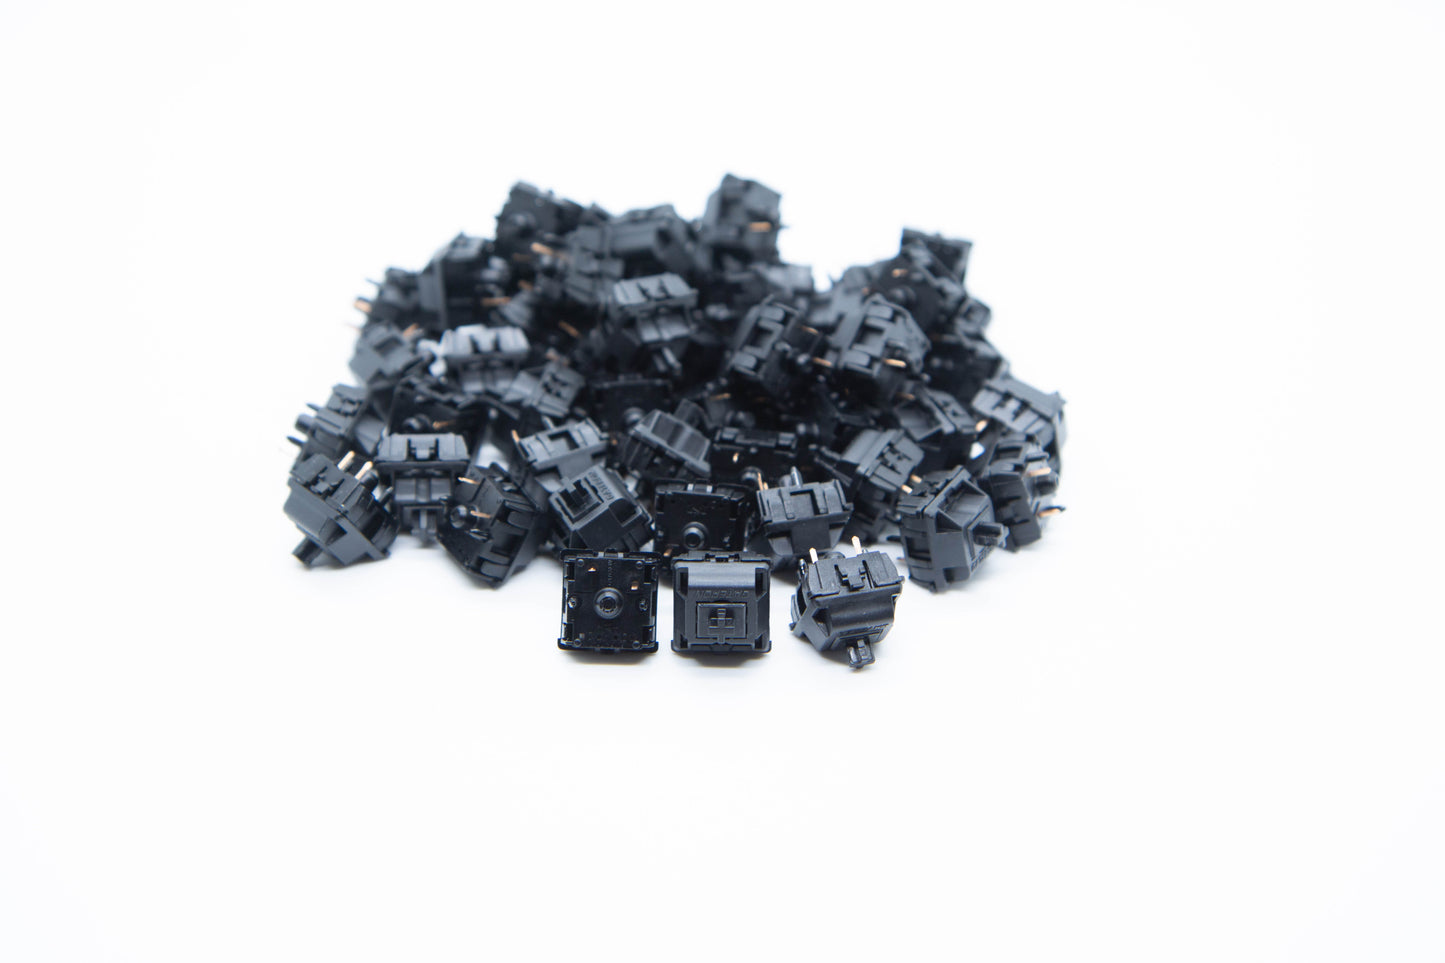 Close-up shot of a pile of Gateron Oil King mechanical keyboard switches featuring black housing and black stems